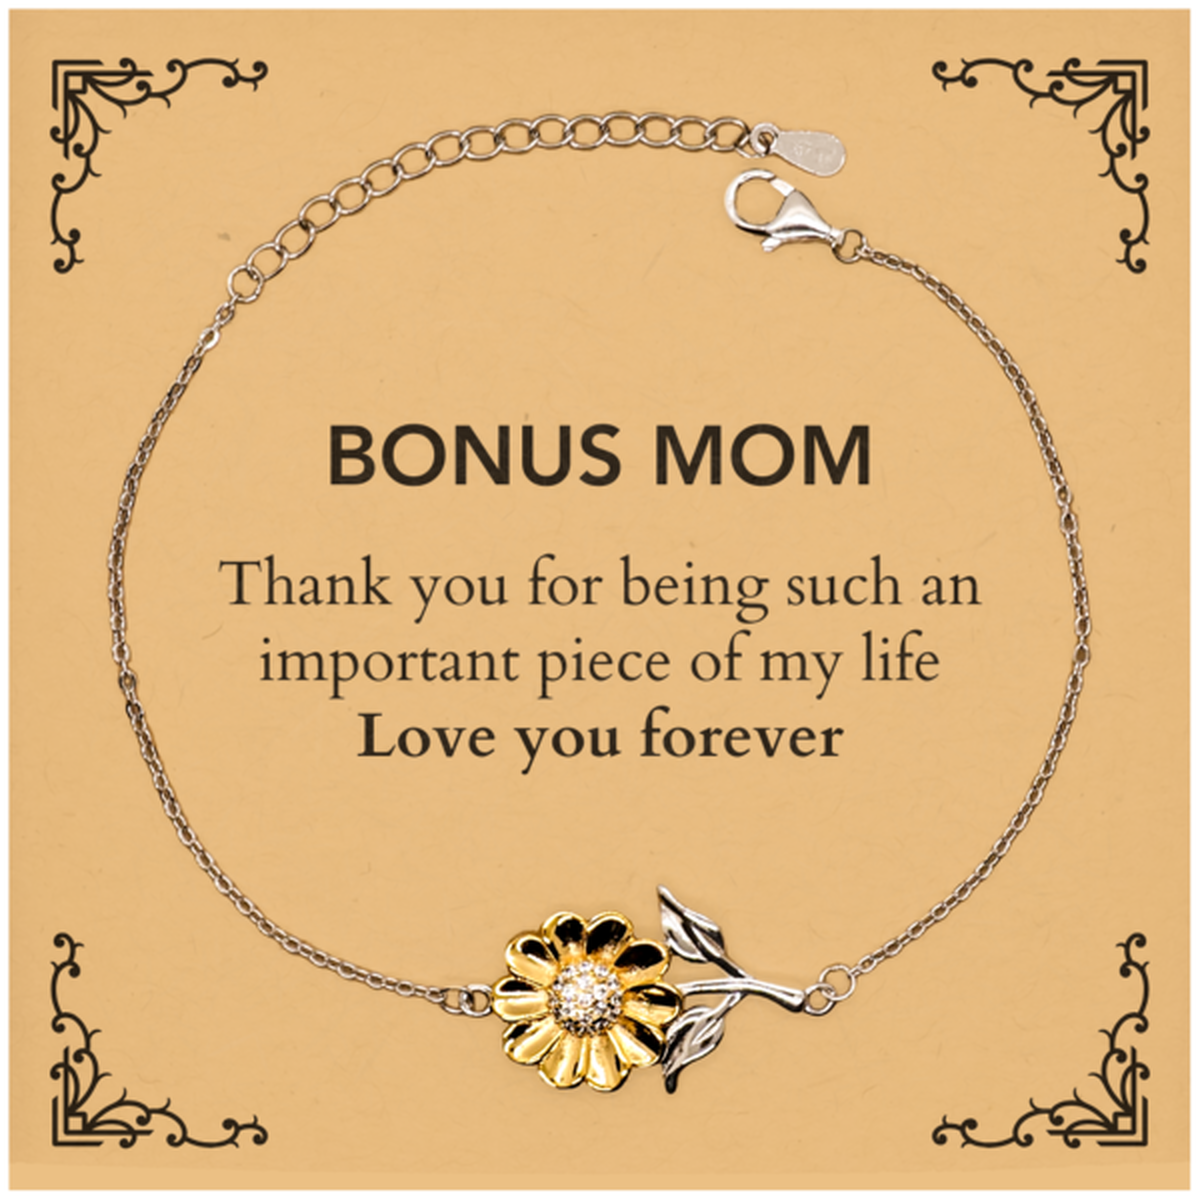 Appropriate Bonus Mom Sunflower Bracelet Epic Birthday Gifts for Bonus Mom Thank you for being such an important piece of my life Bonus Mom Christmas Mothers Fathers Day